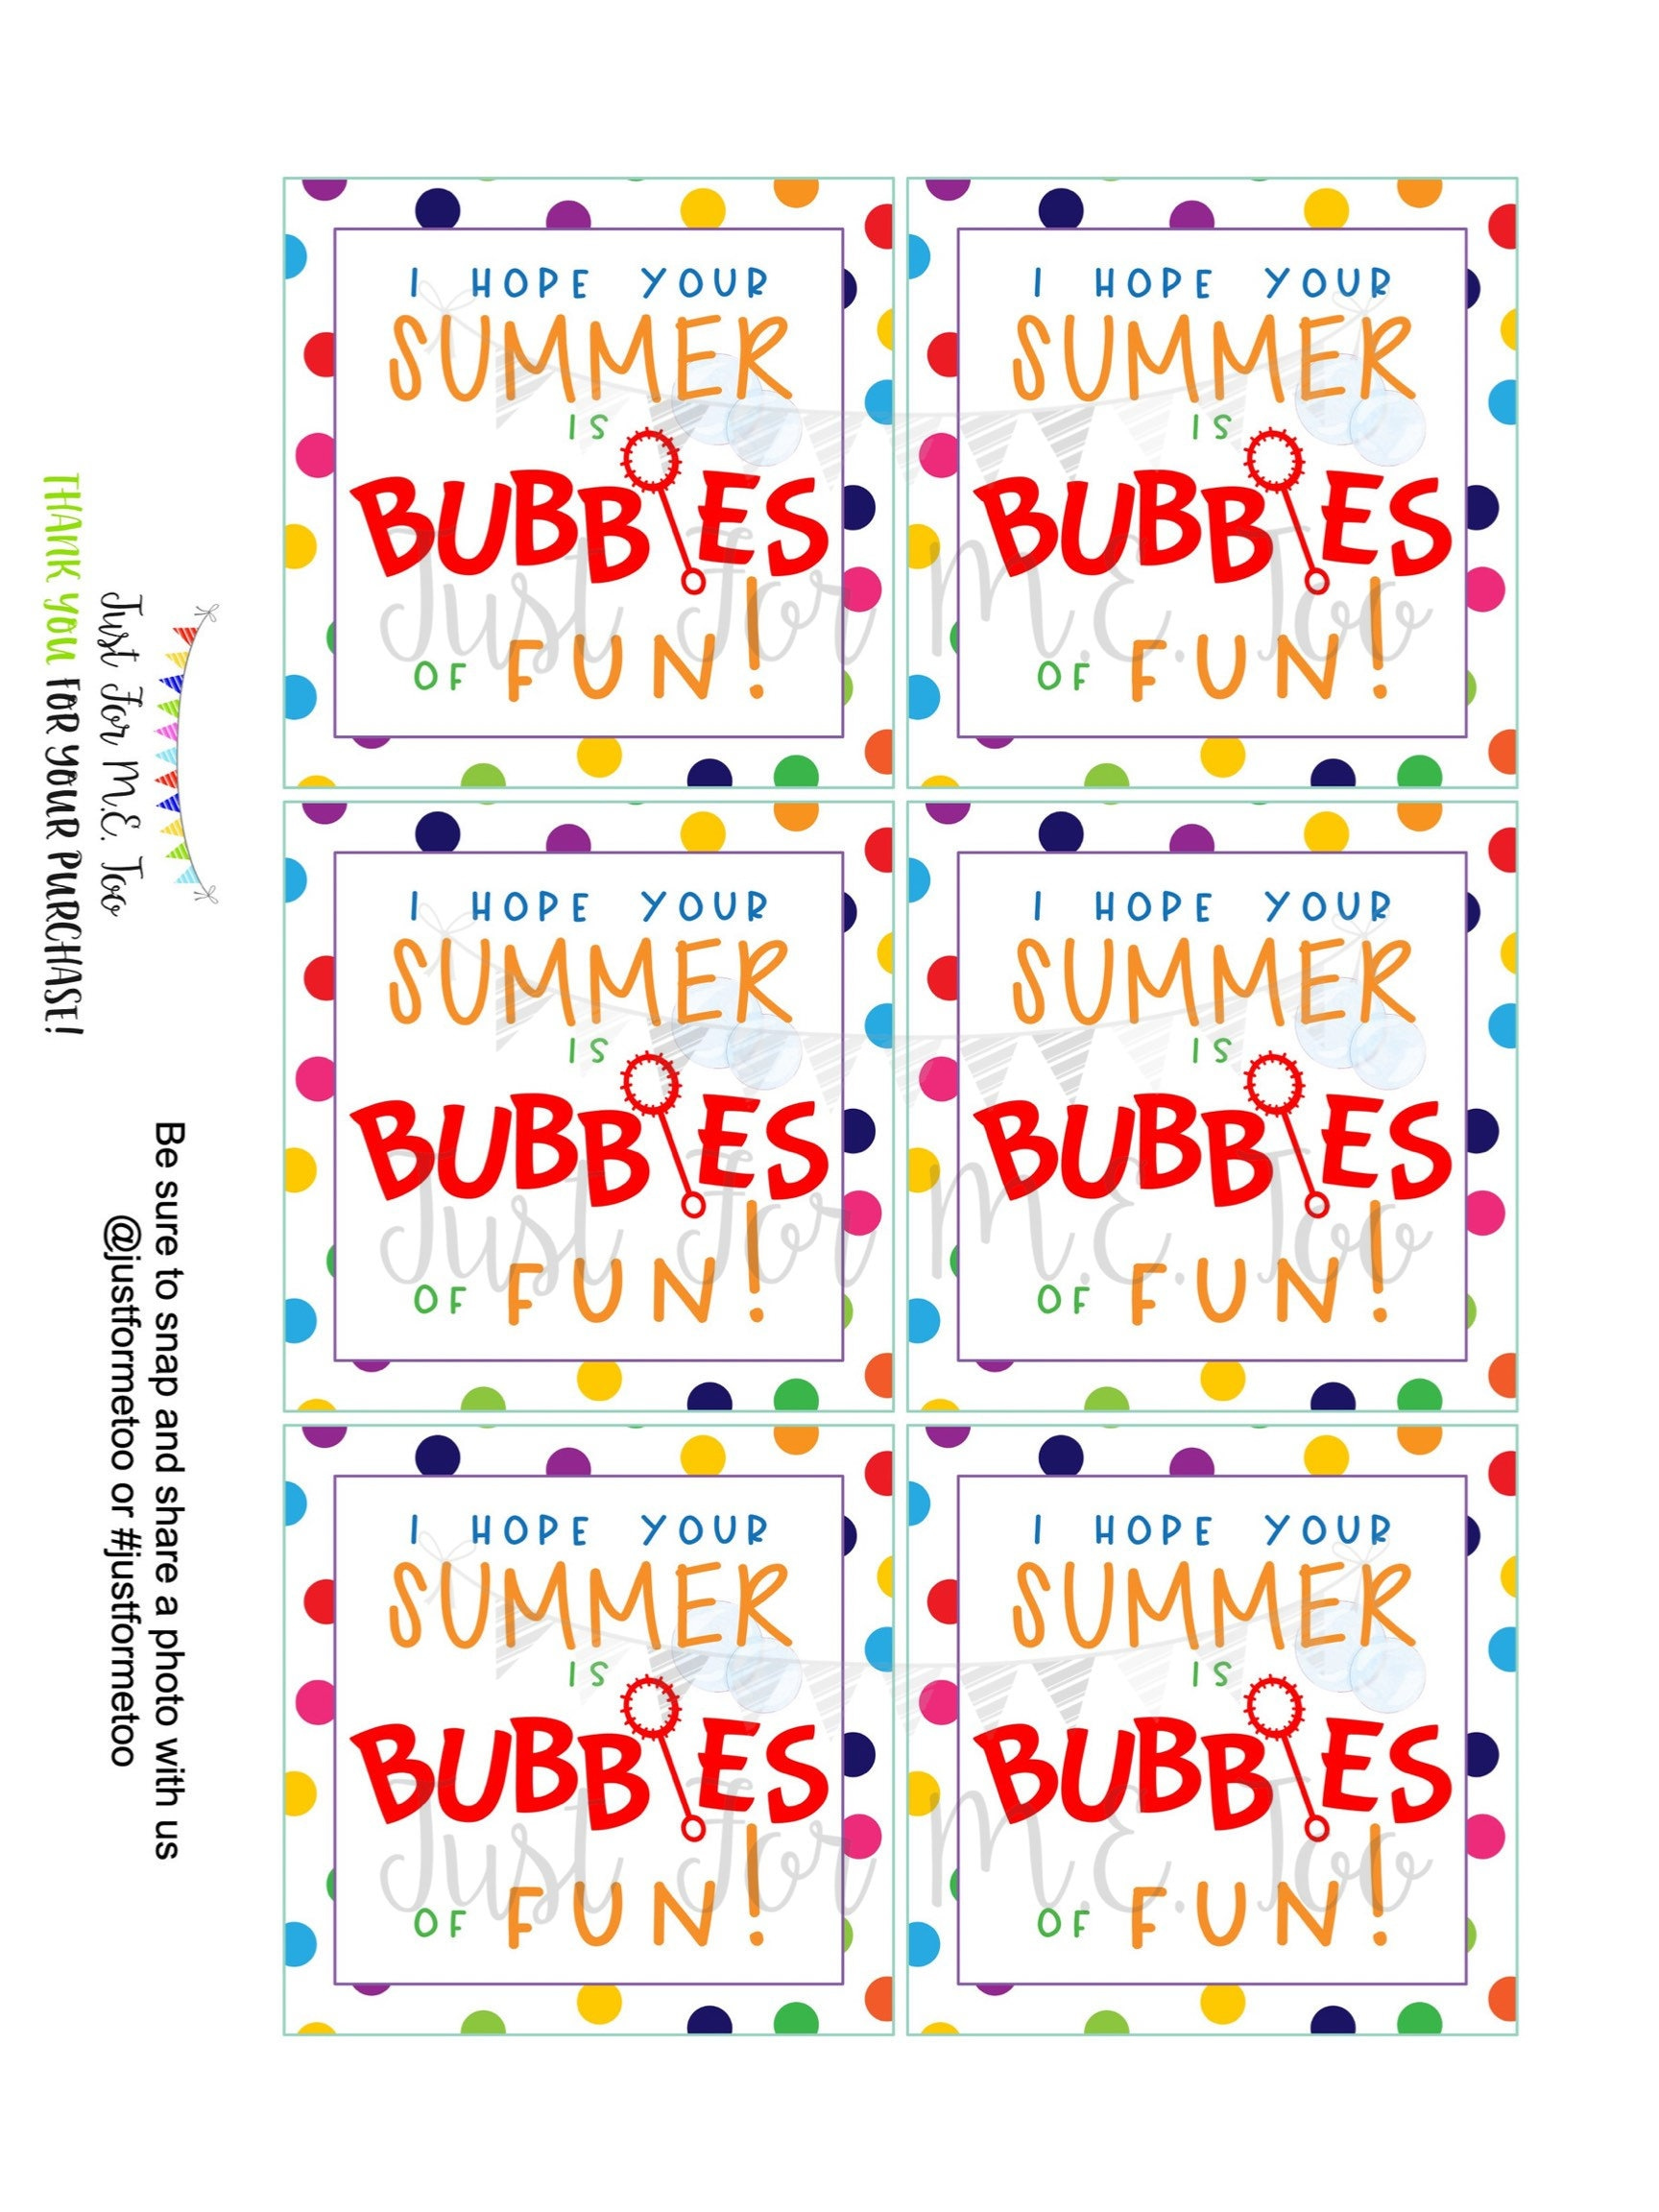 Free Printable Gift Tags For Bubbles Shopping | Tunisia.cospe intended for Free Printable Gift Tags for Bubbles